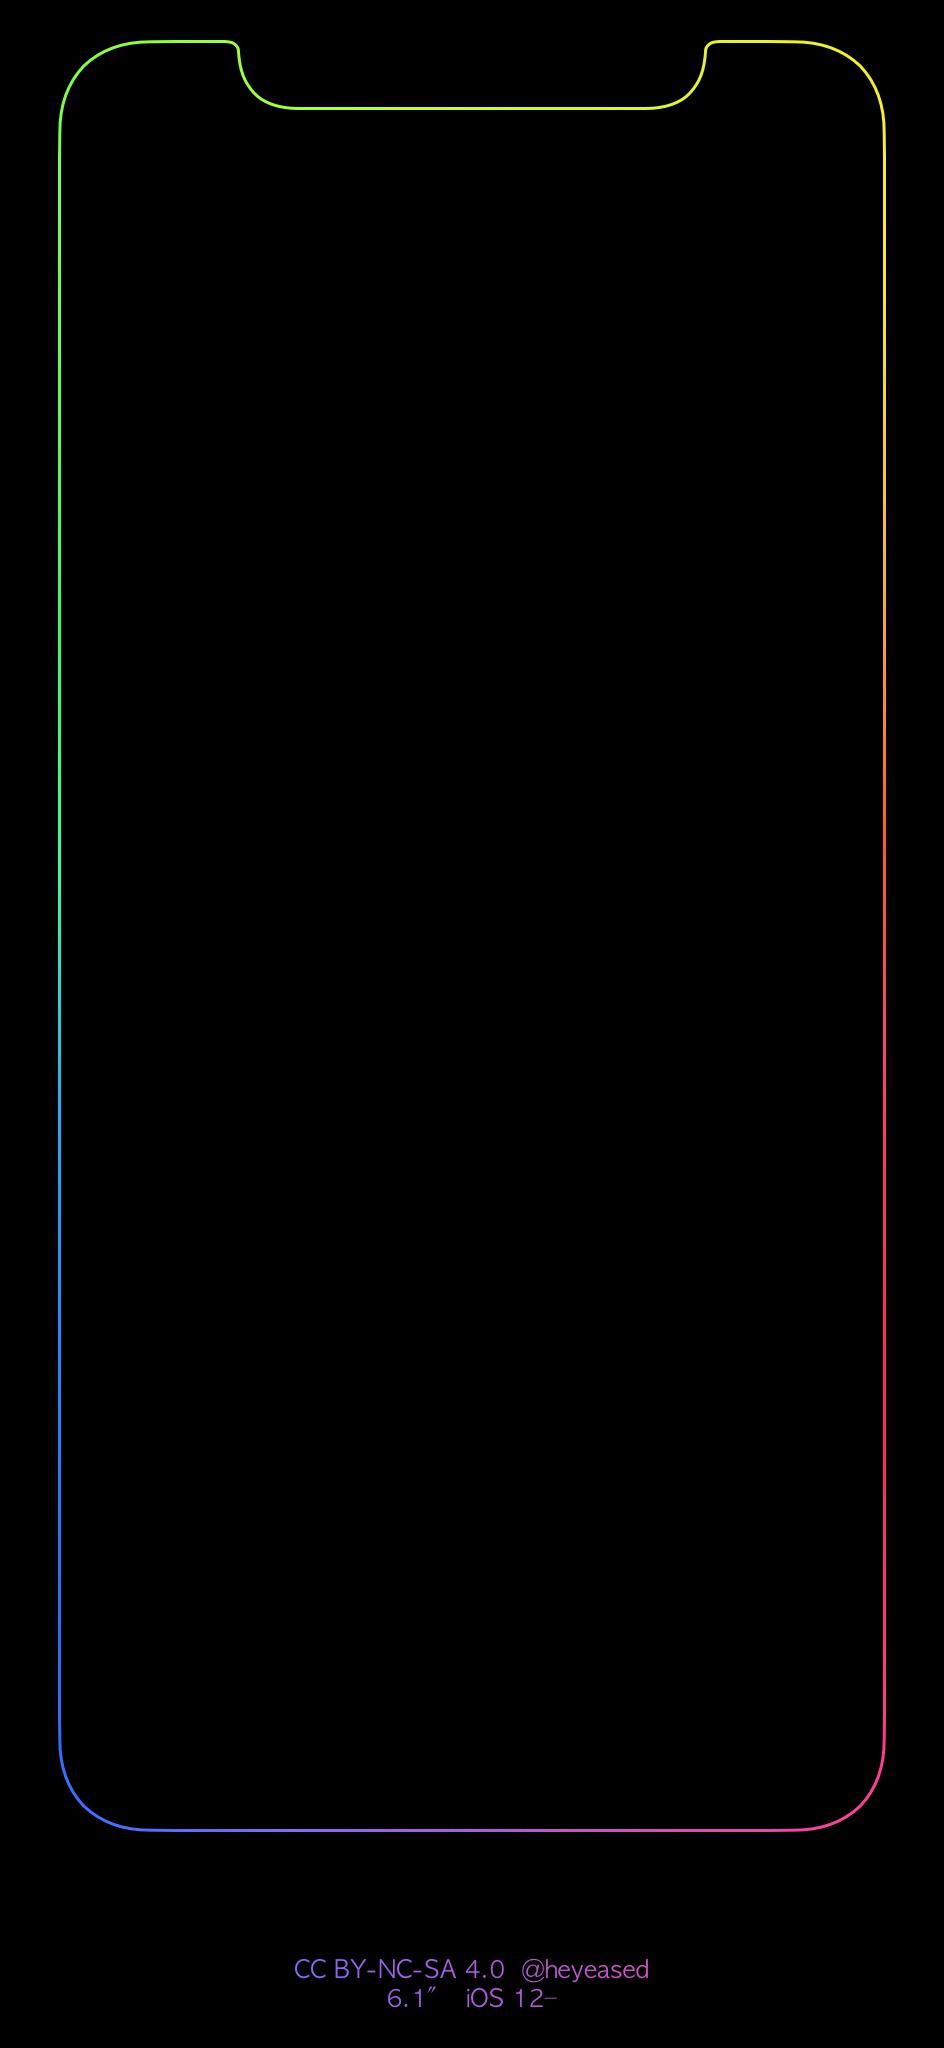 Here's a wallpaper for the iPhone XR that perfectly borders the screen in rainbow. There's a bunch of other cool wallpaper too at this website